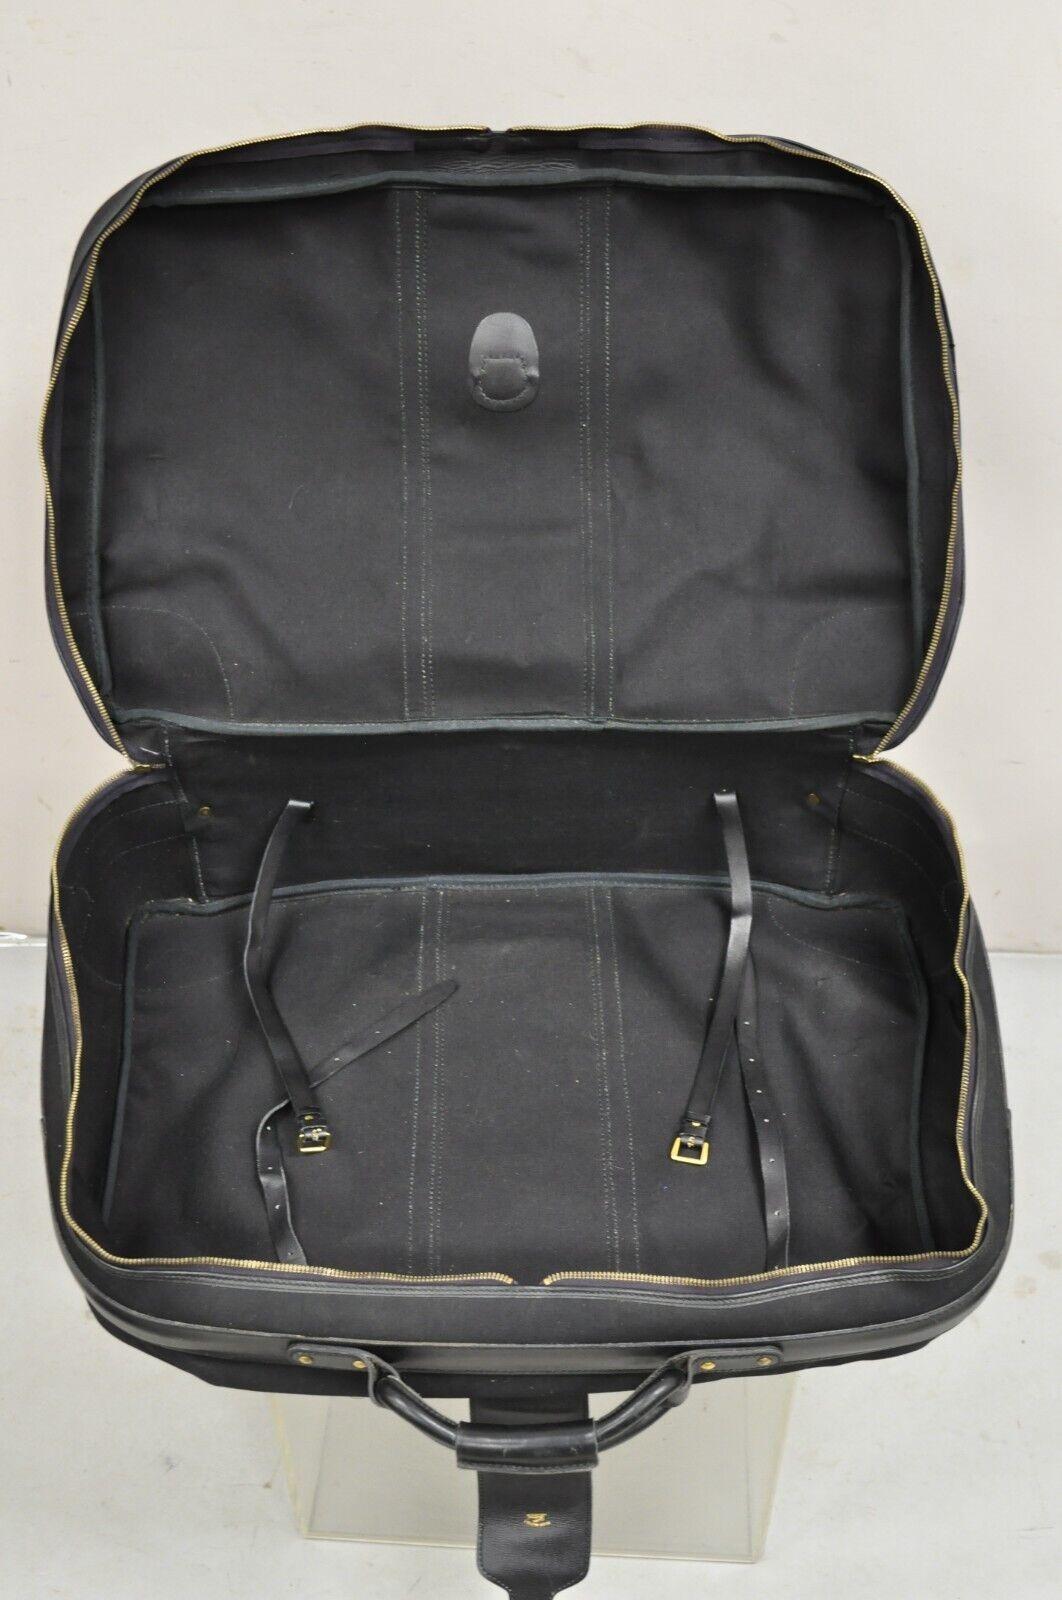 Vintage Gucci Black Canvas & Leather Suitcase Luggage His and Hers Set -2 Pc (B) For Sale 1